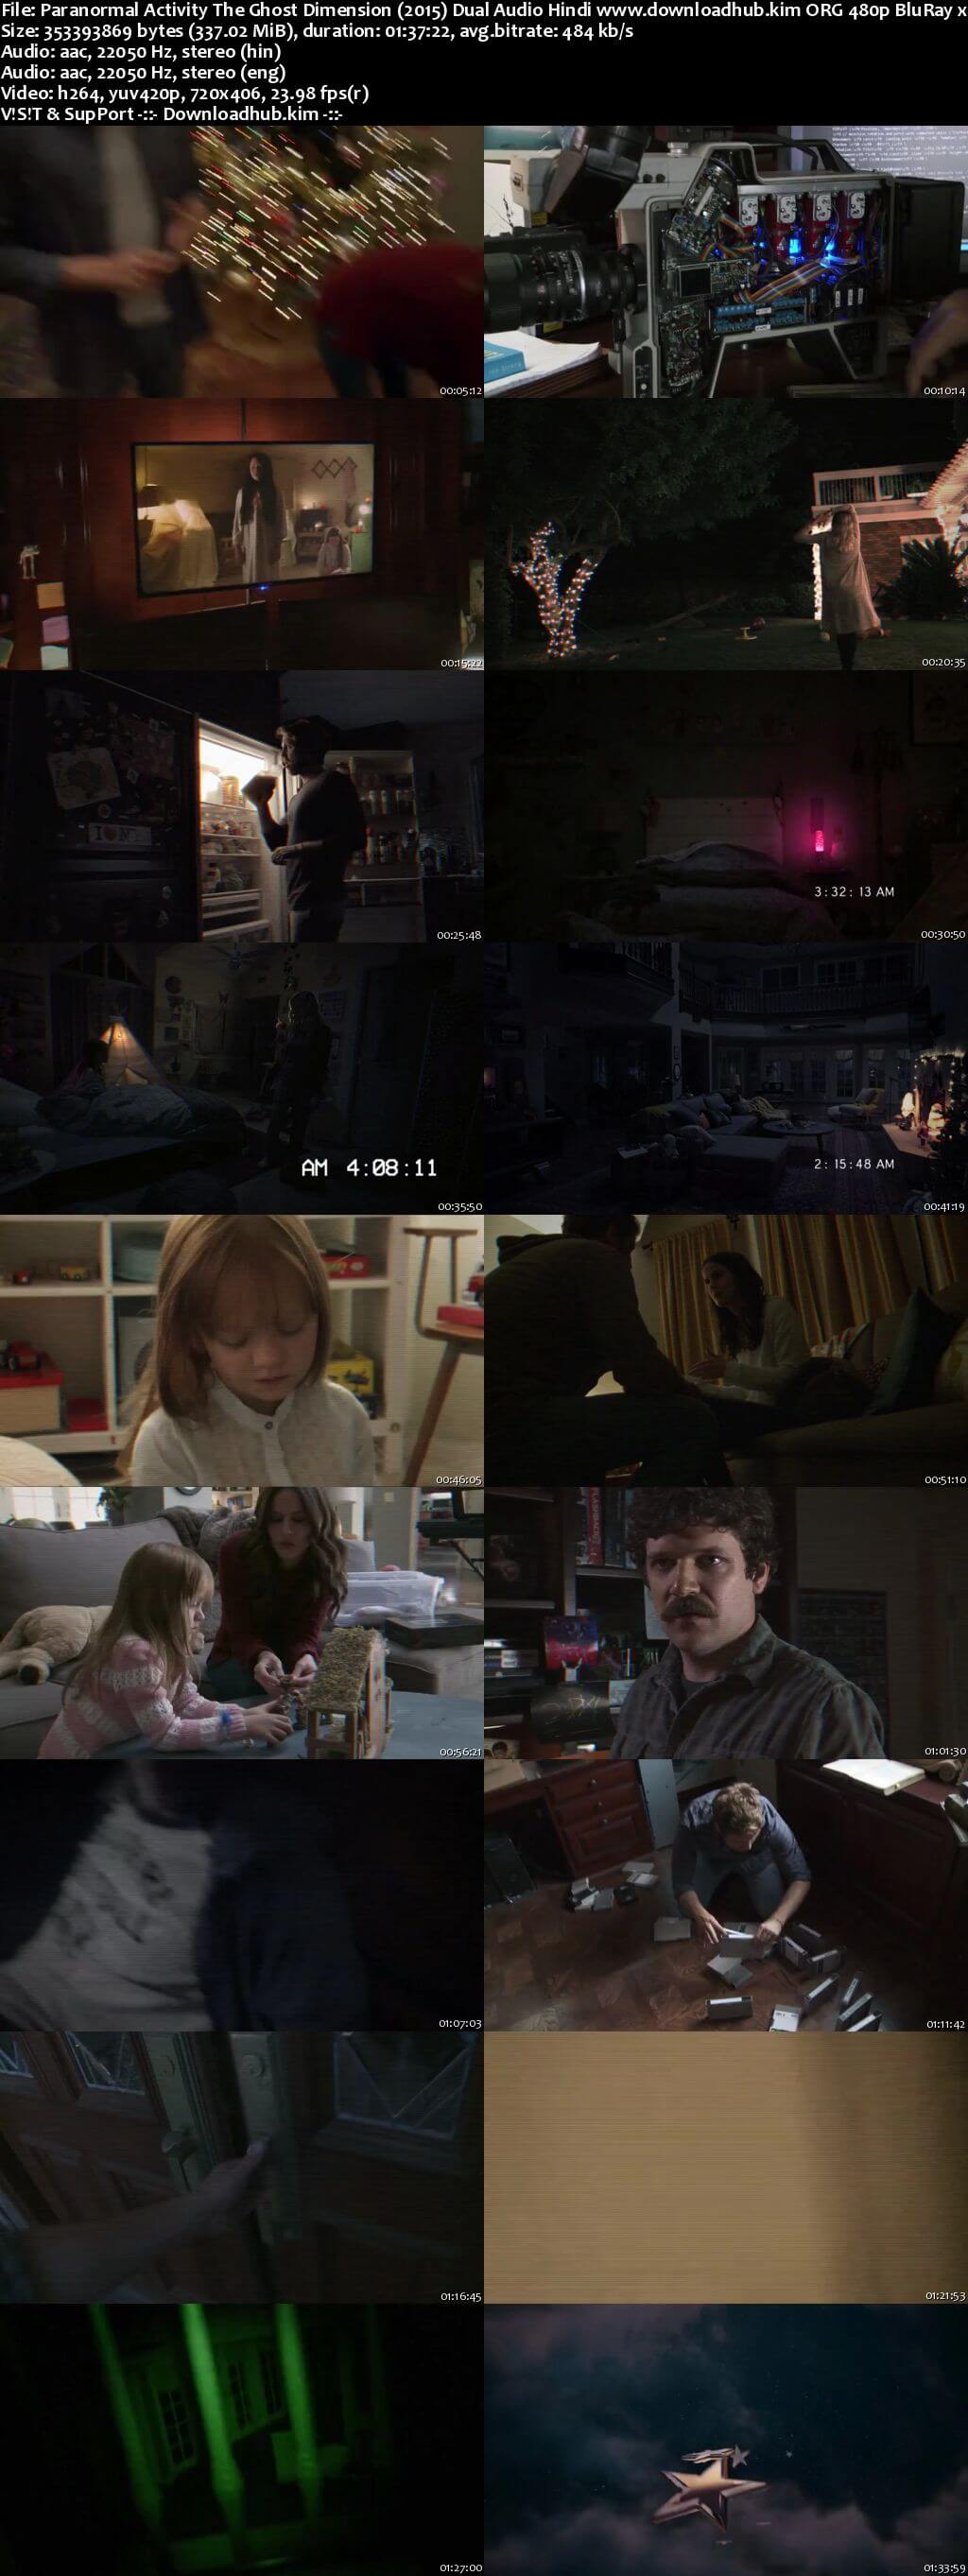 Paranormal Activity The Ghost Dimension 2015 Hindi Dual Audio 300MB BluRay 480p